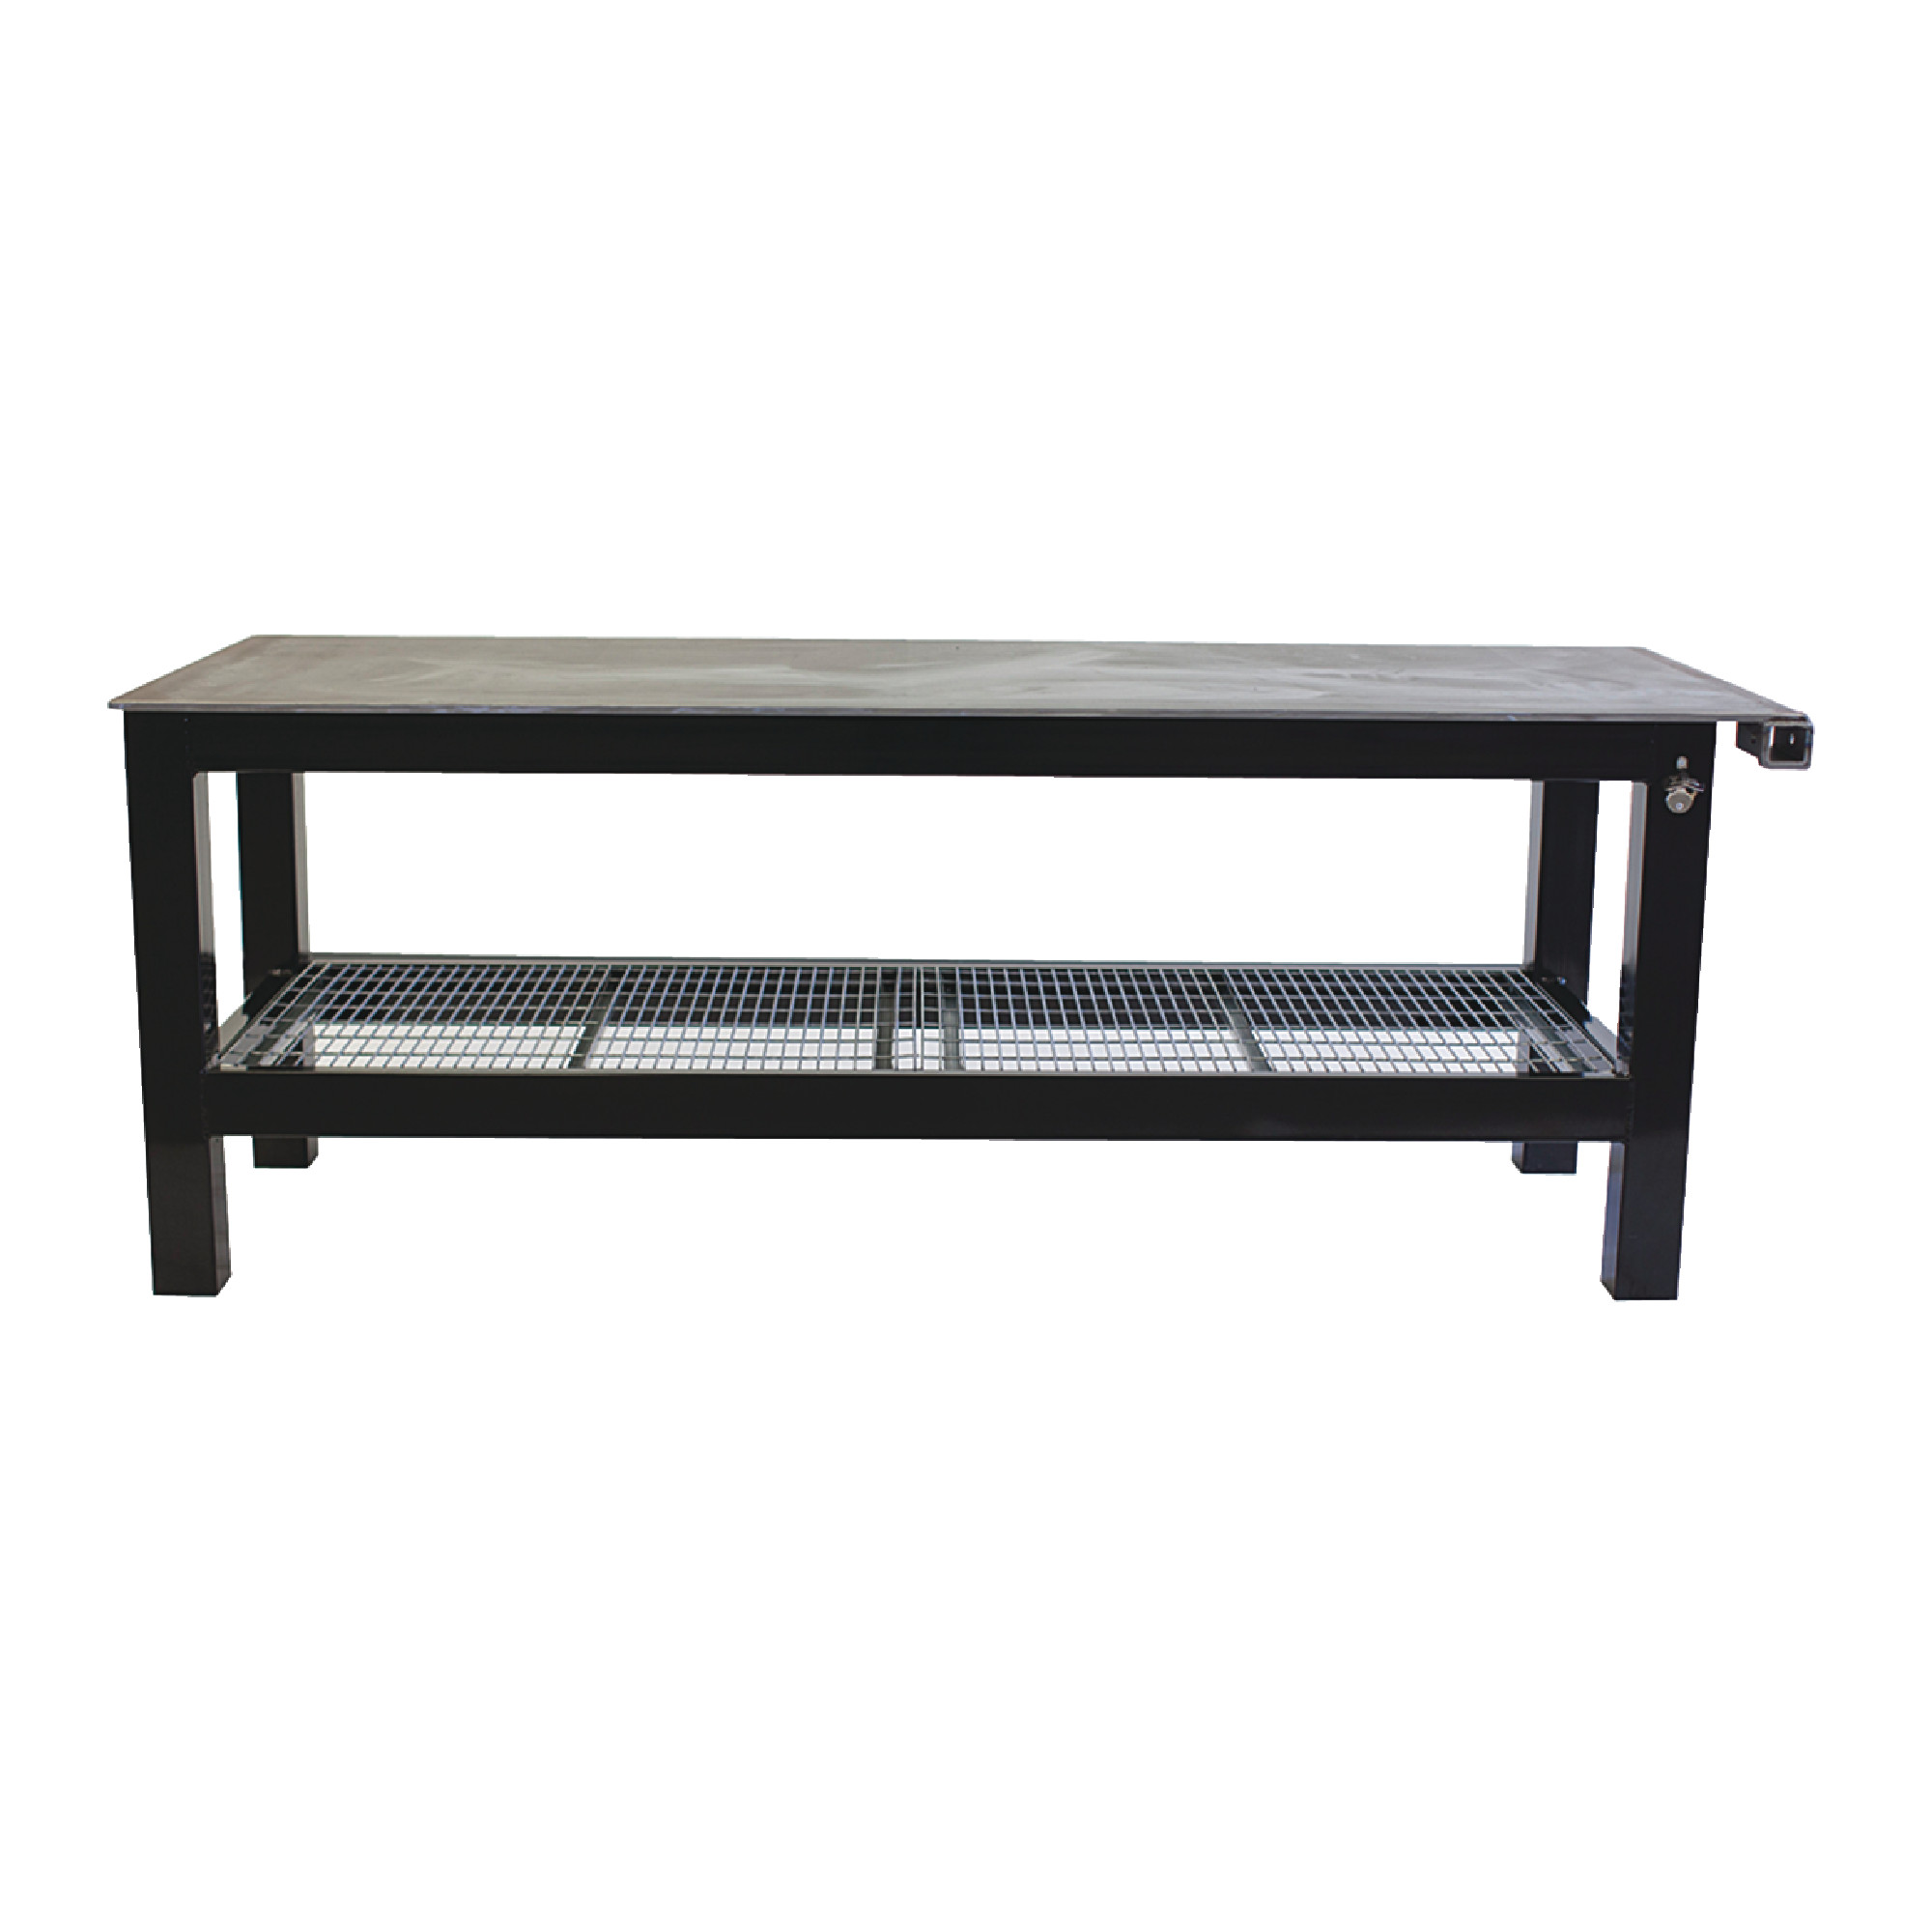 Welding Table With 1/4" Plate Steel Top